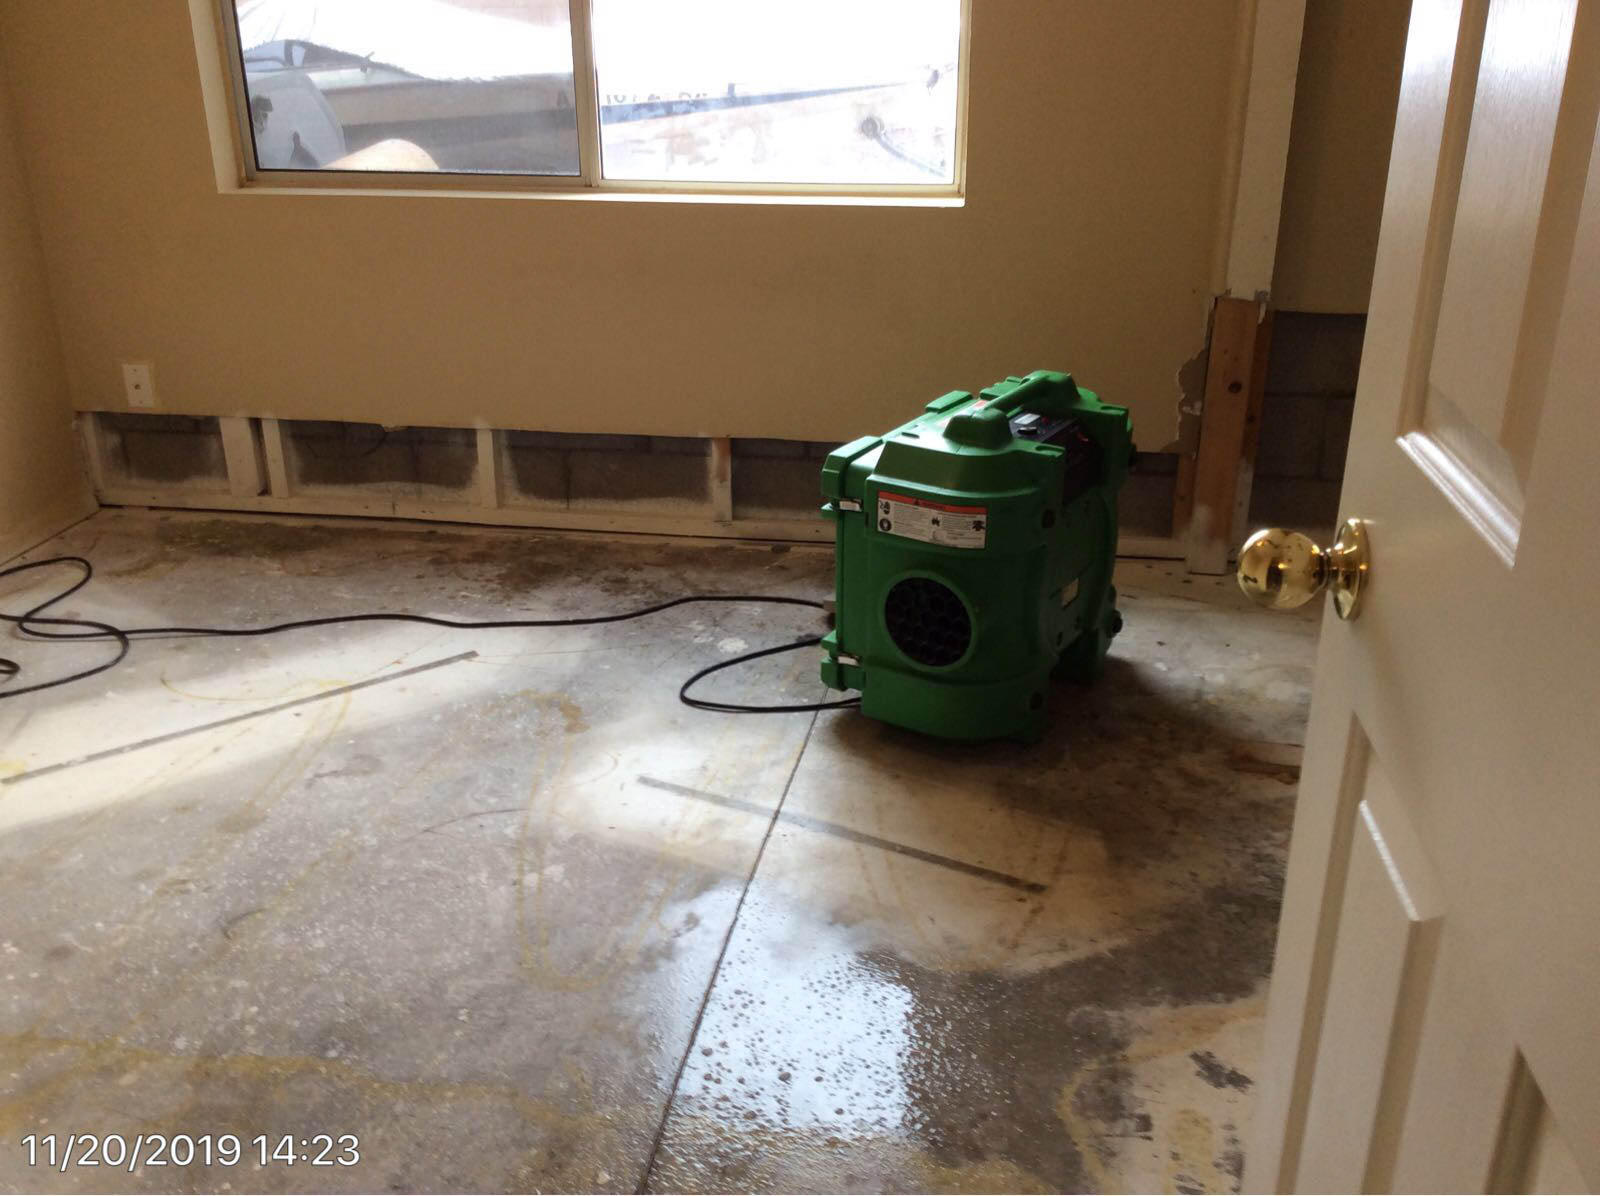 If you need help with clean up or restoration contact SERVPRO of Peoria / West Glendale.